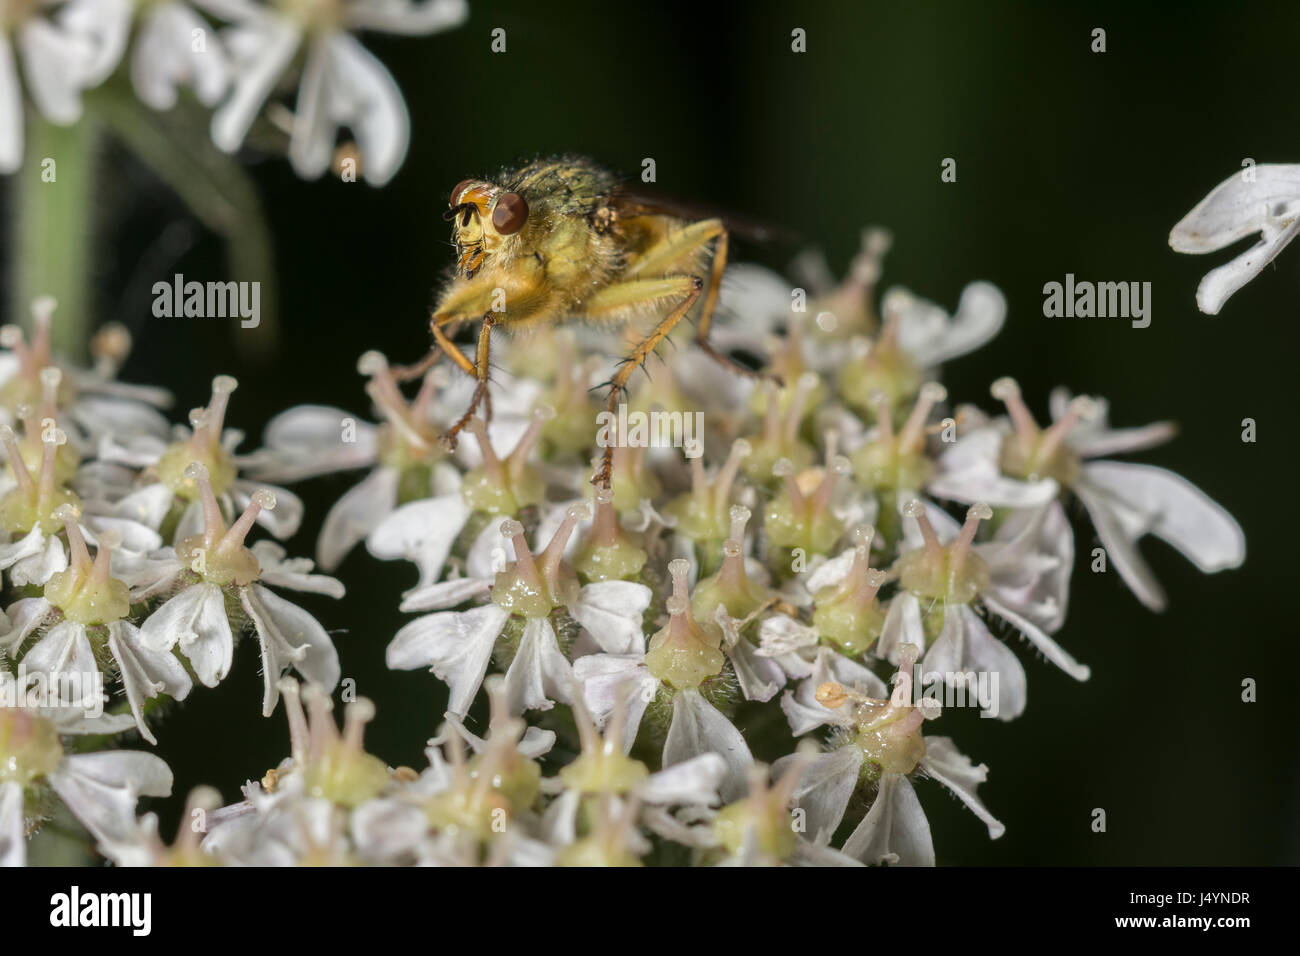 Umbelliferous flowers of Hogweed / Cow Parsnip / Heracleum sphondylium with Yellow Dung Fly / Scathophaga stercoria. Stock Photo